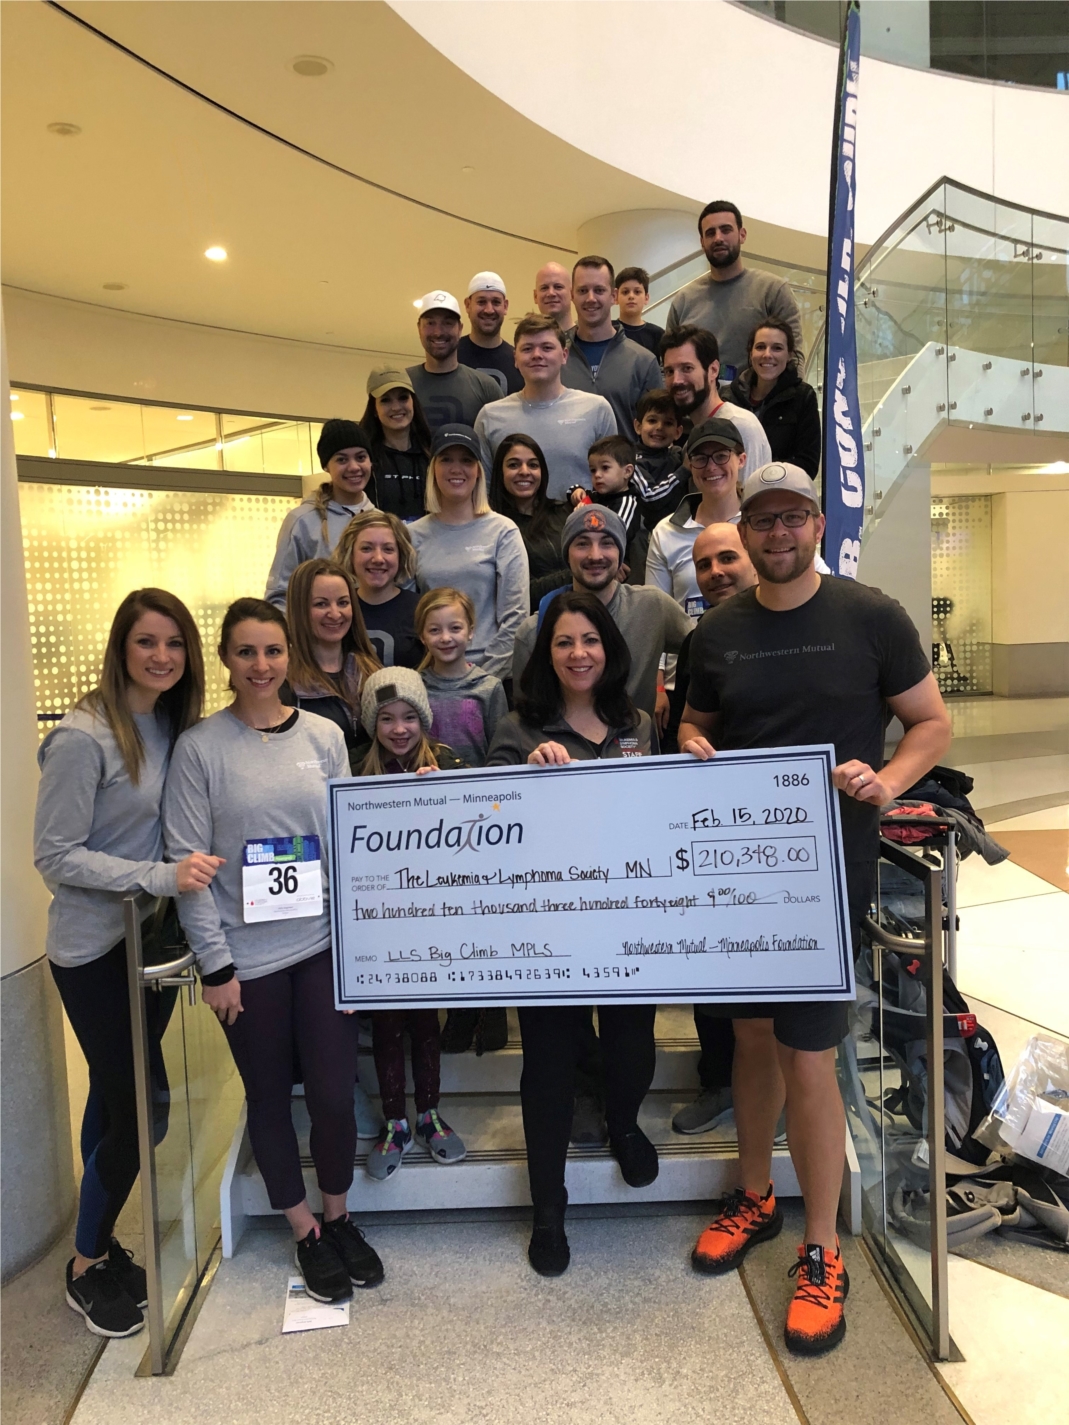 Our team came together to climb 153 flights of stairs in our fight against cancer. We climbed the stairs of our building in Minneapolis, the Capella Tower, through the Big Climb event put on by LLS.